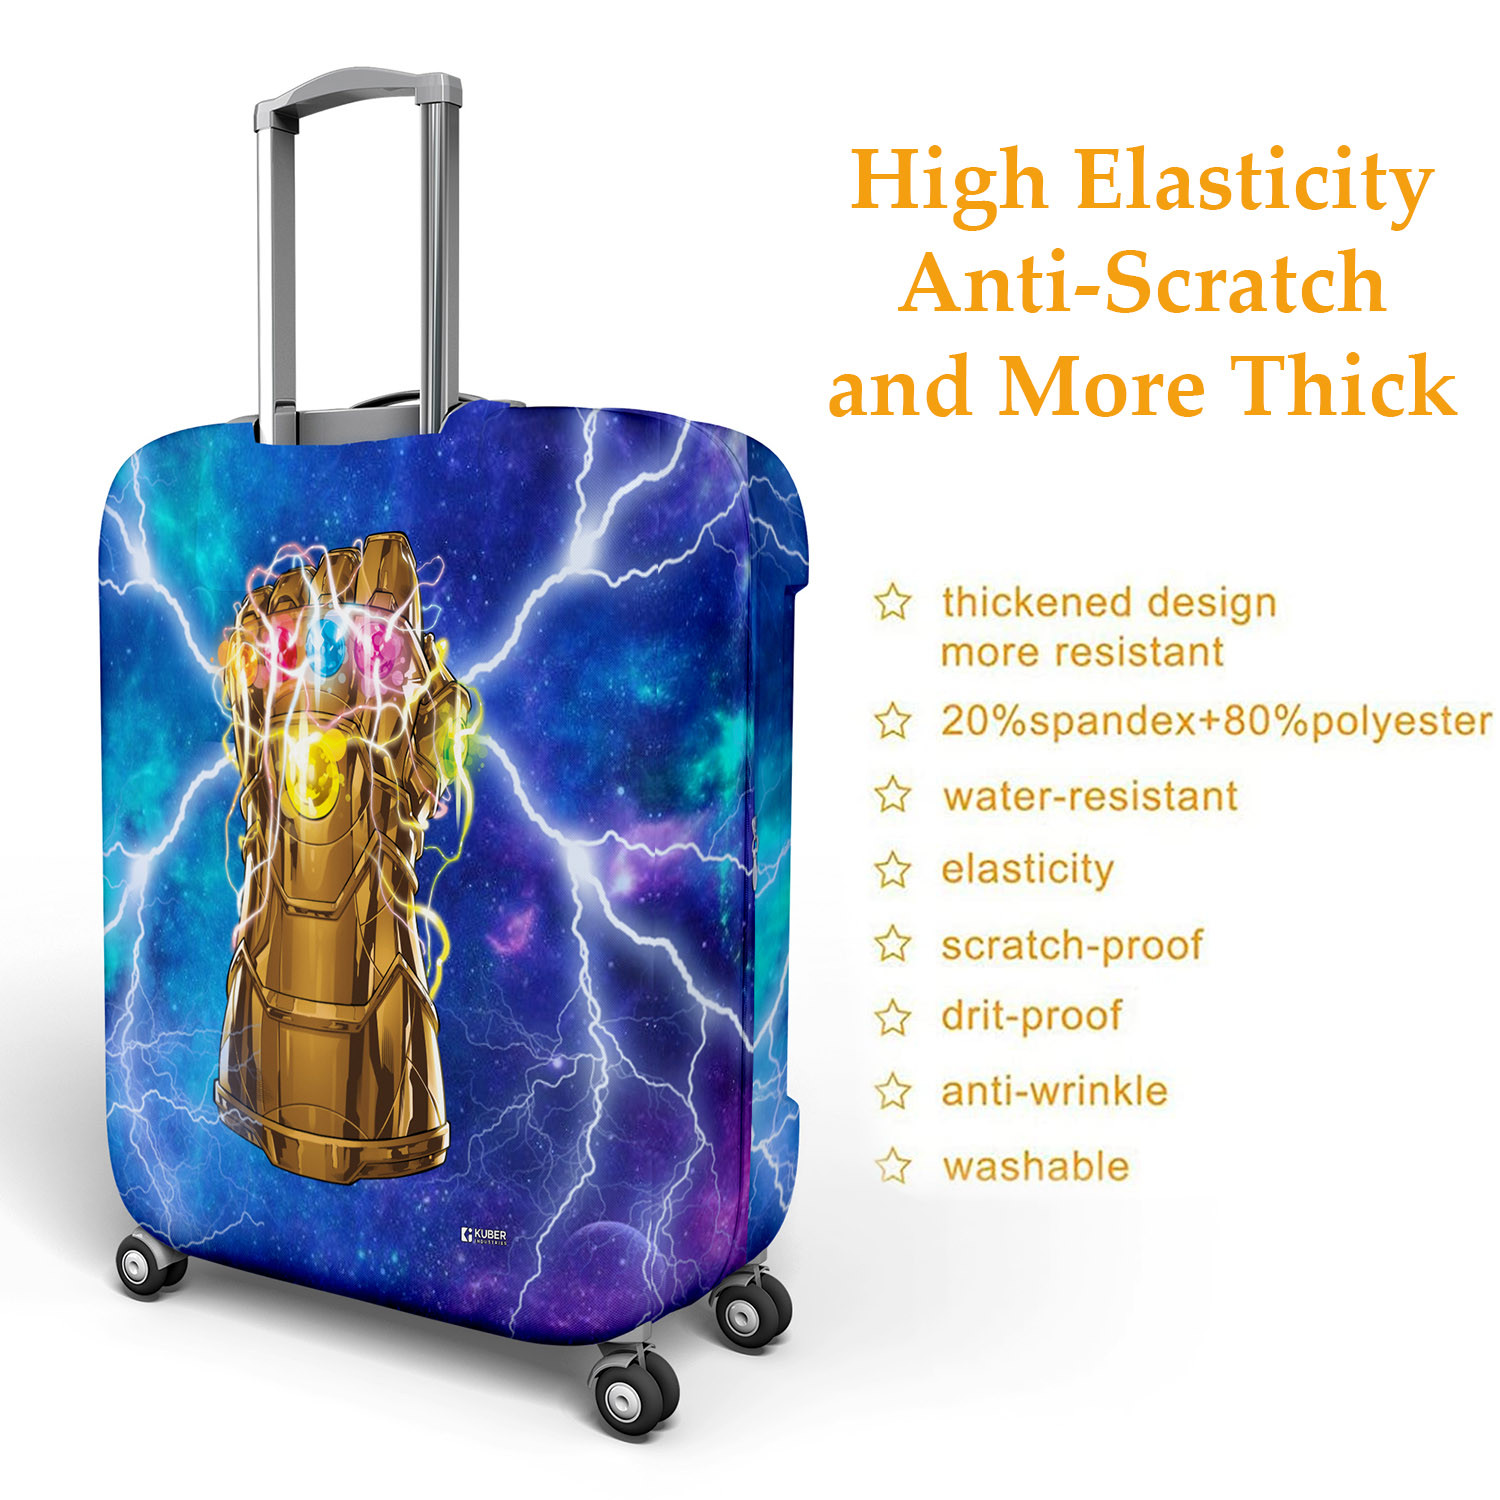 Kuber Industries Marvel The Infinity Gauntlet Luggage Cover | Polyester Travel Suitcase Cover | Washable | Stretchable Suitcase Protector | 26-30 Inch | Large | Sky Blue